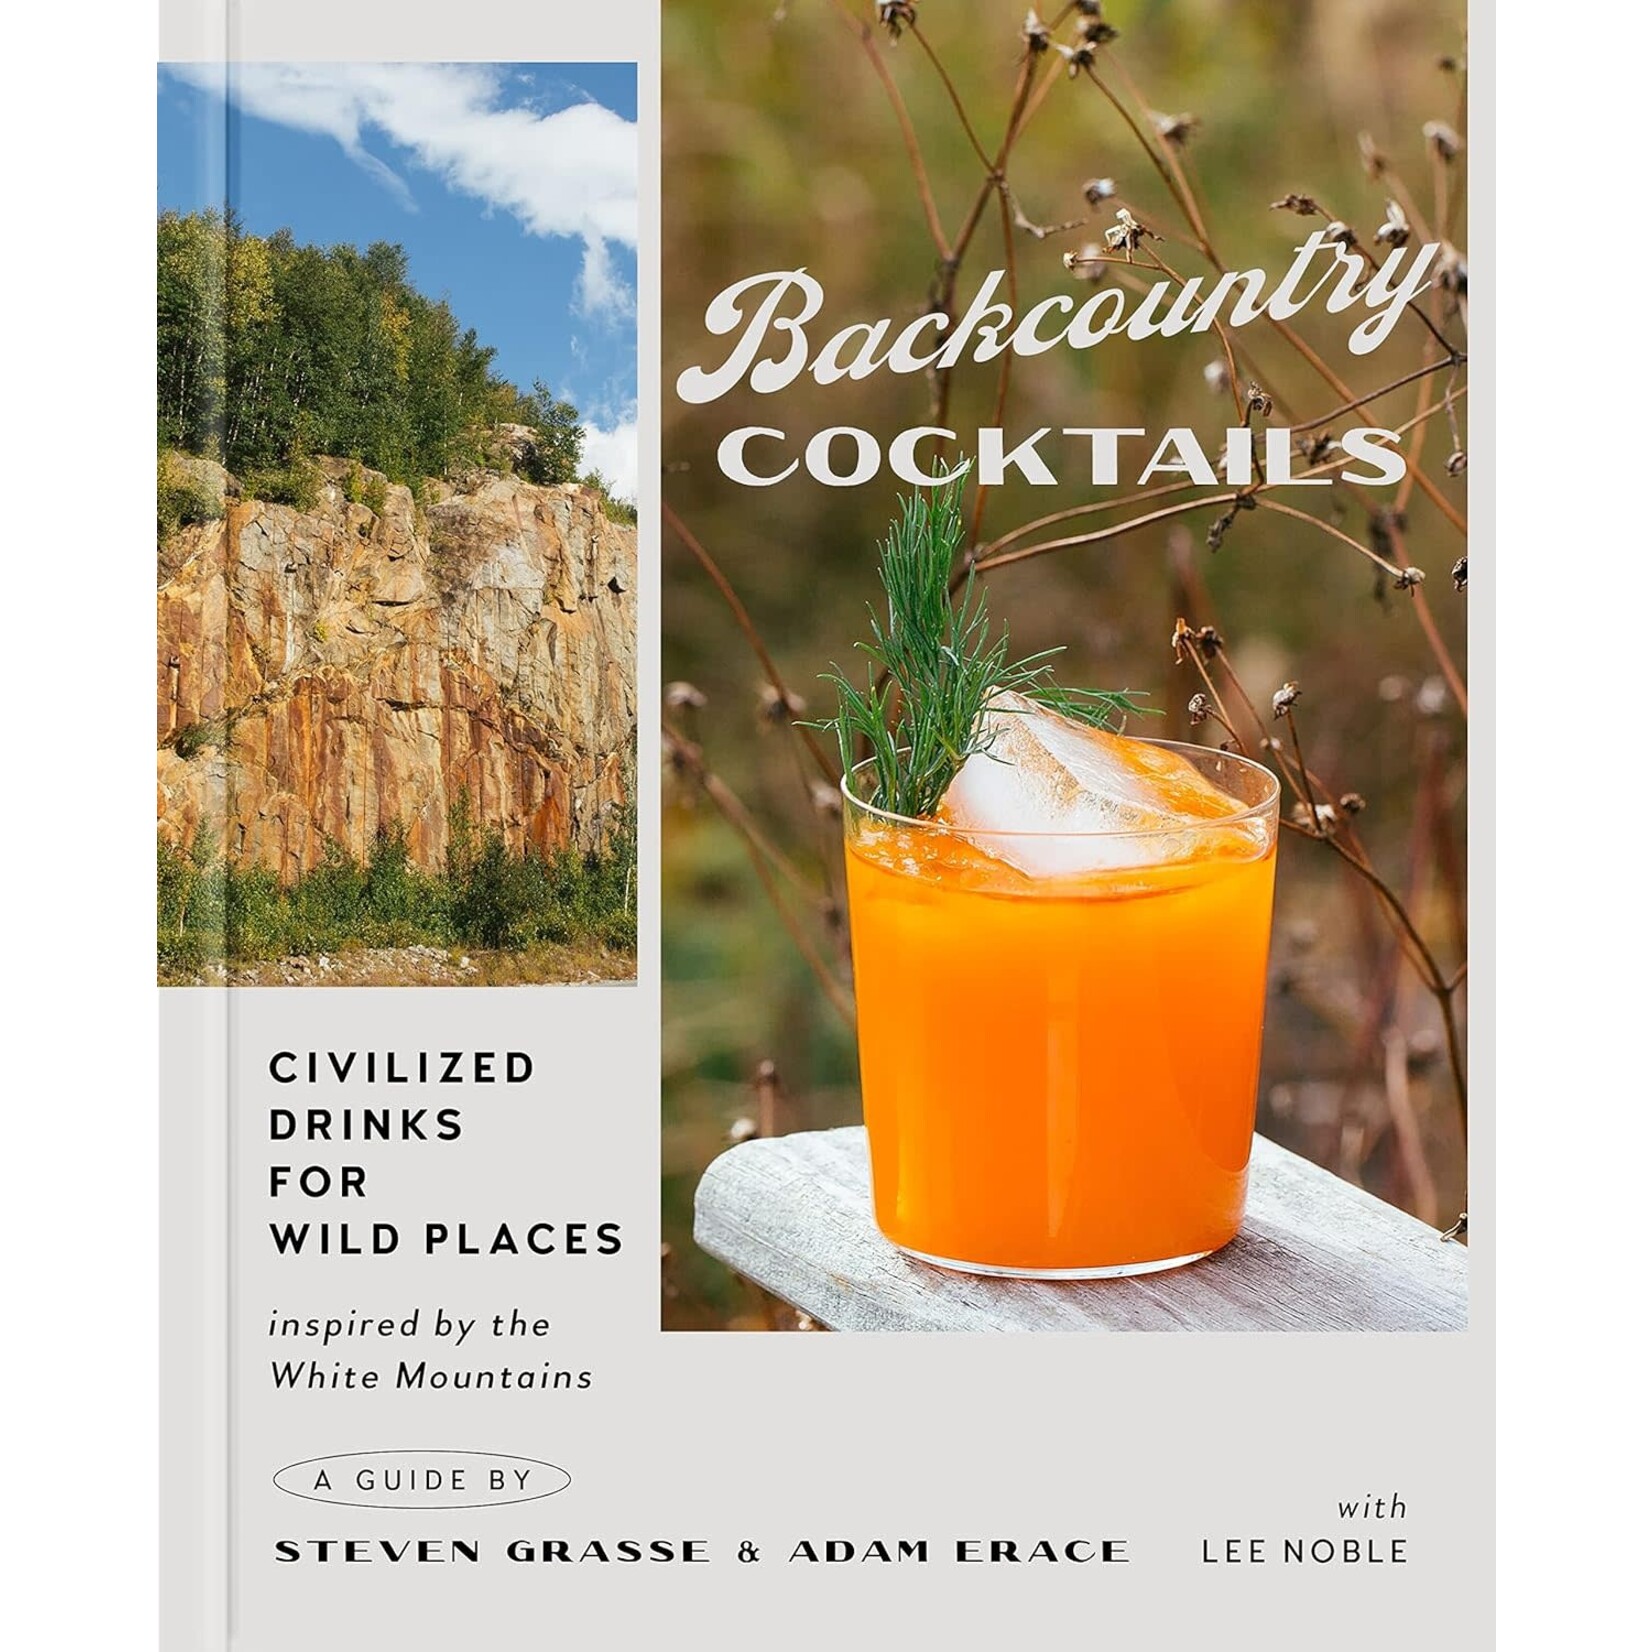 Backcountry Cocktails - Civilized Drinks for Wild Places